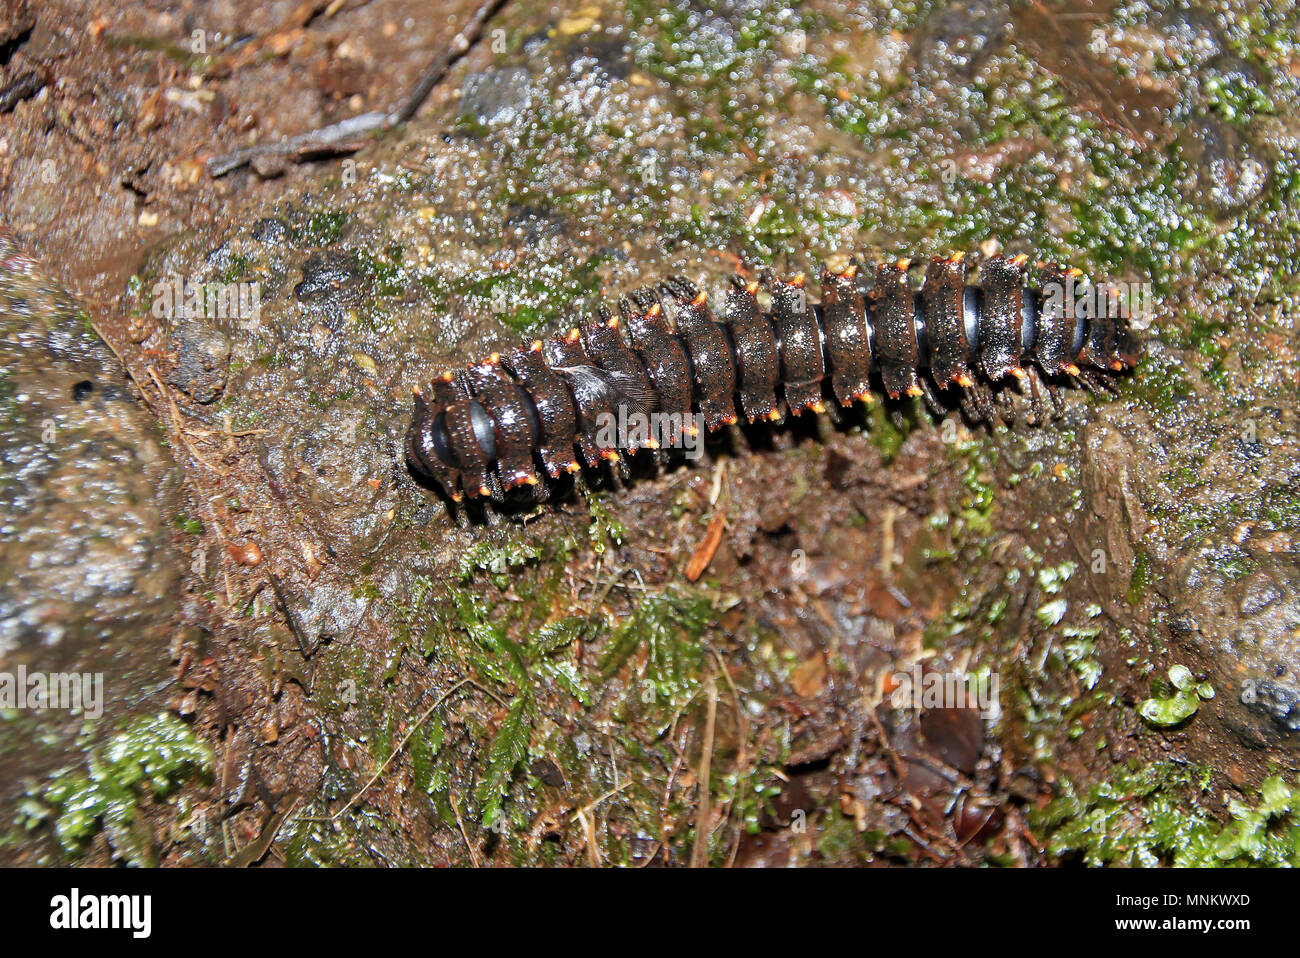 Polydesmid or flat-backed millipede in the Monteverde Cloud Forest Reserve, Costa Rica Stock Photo